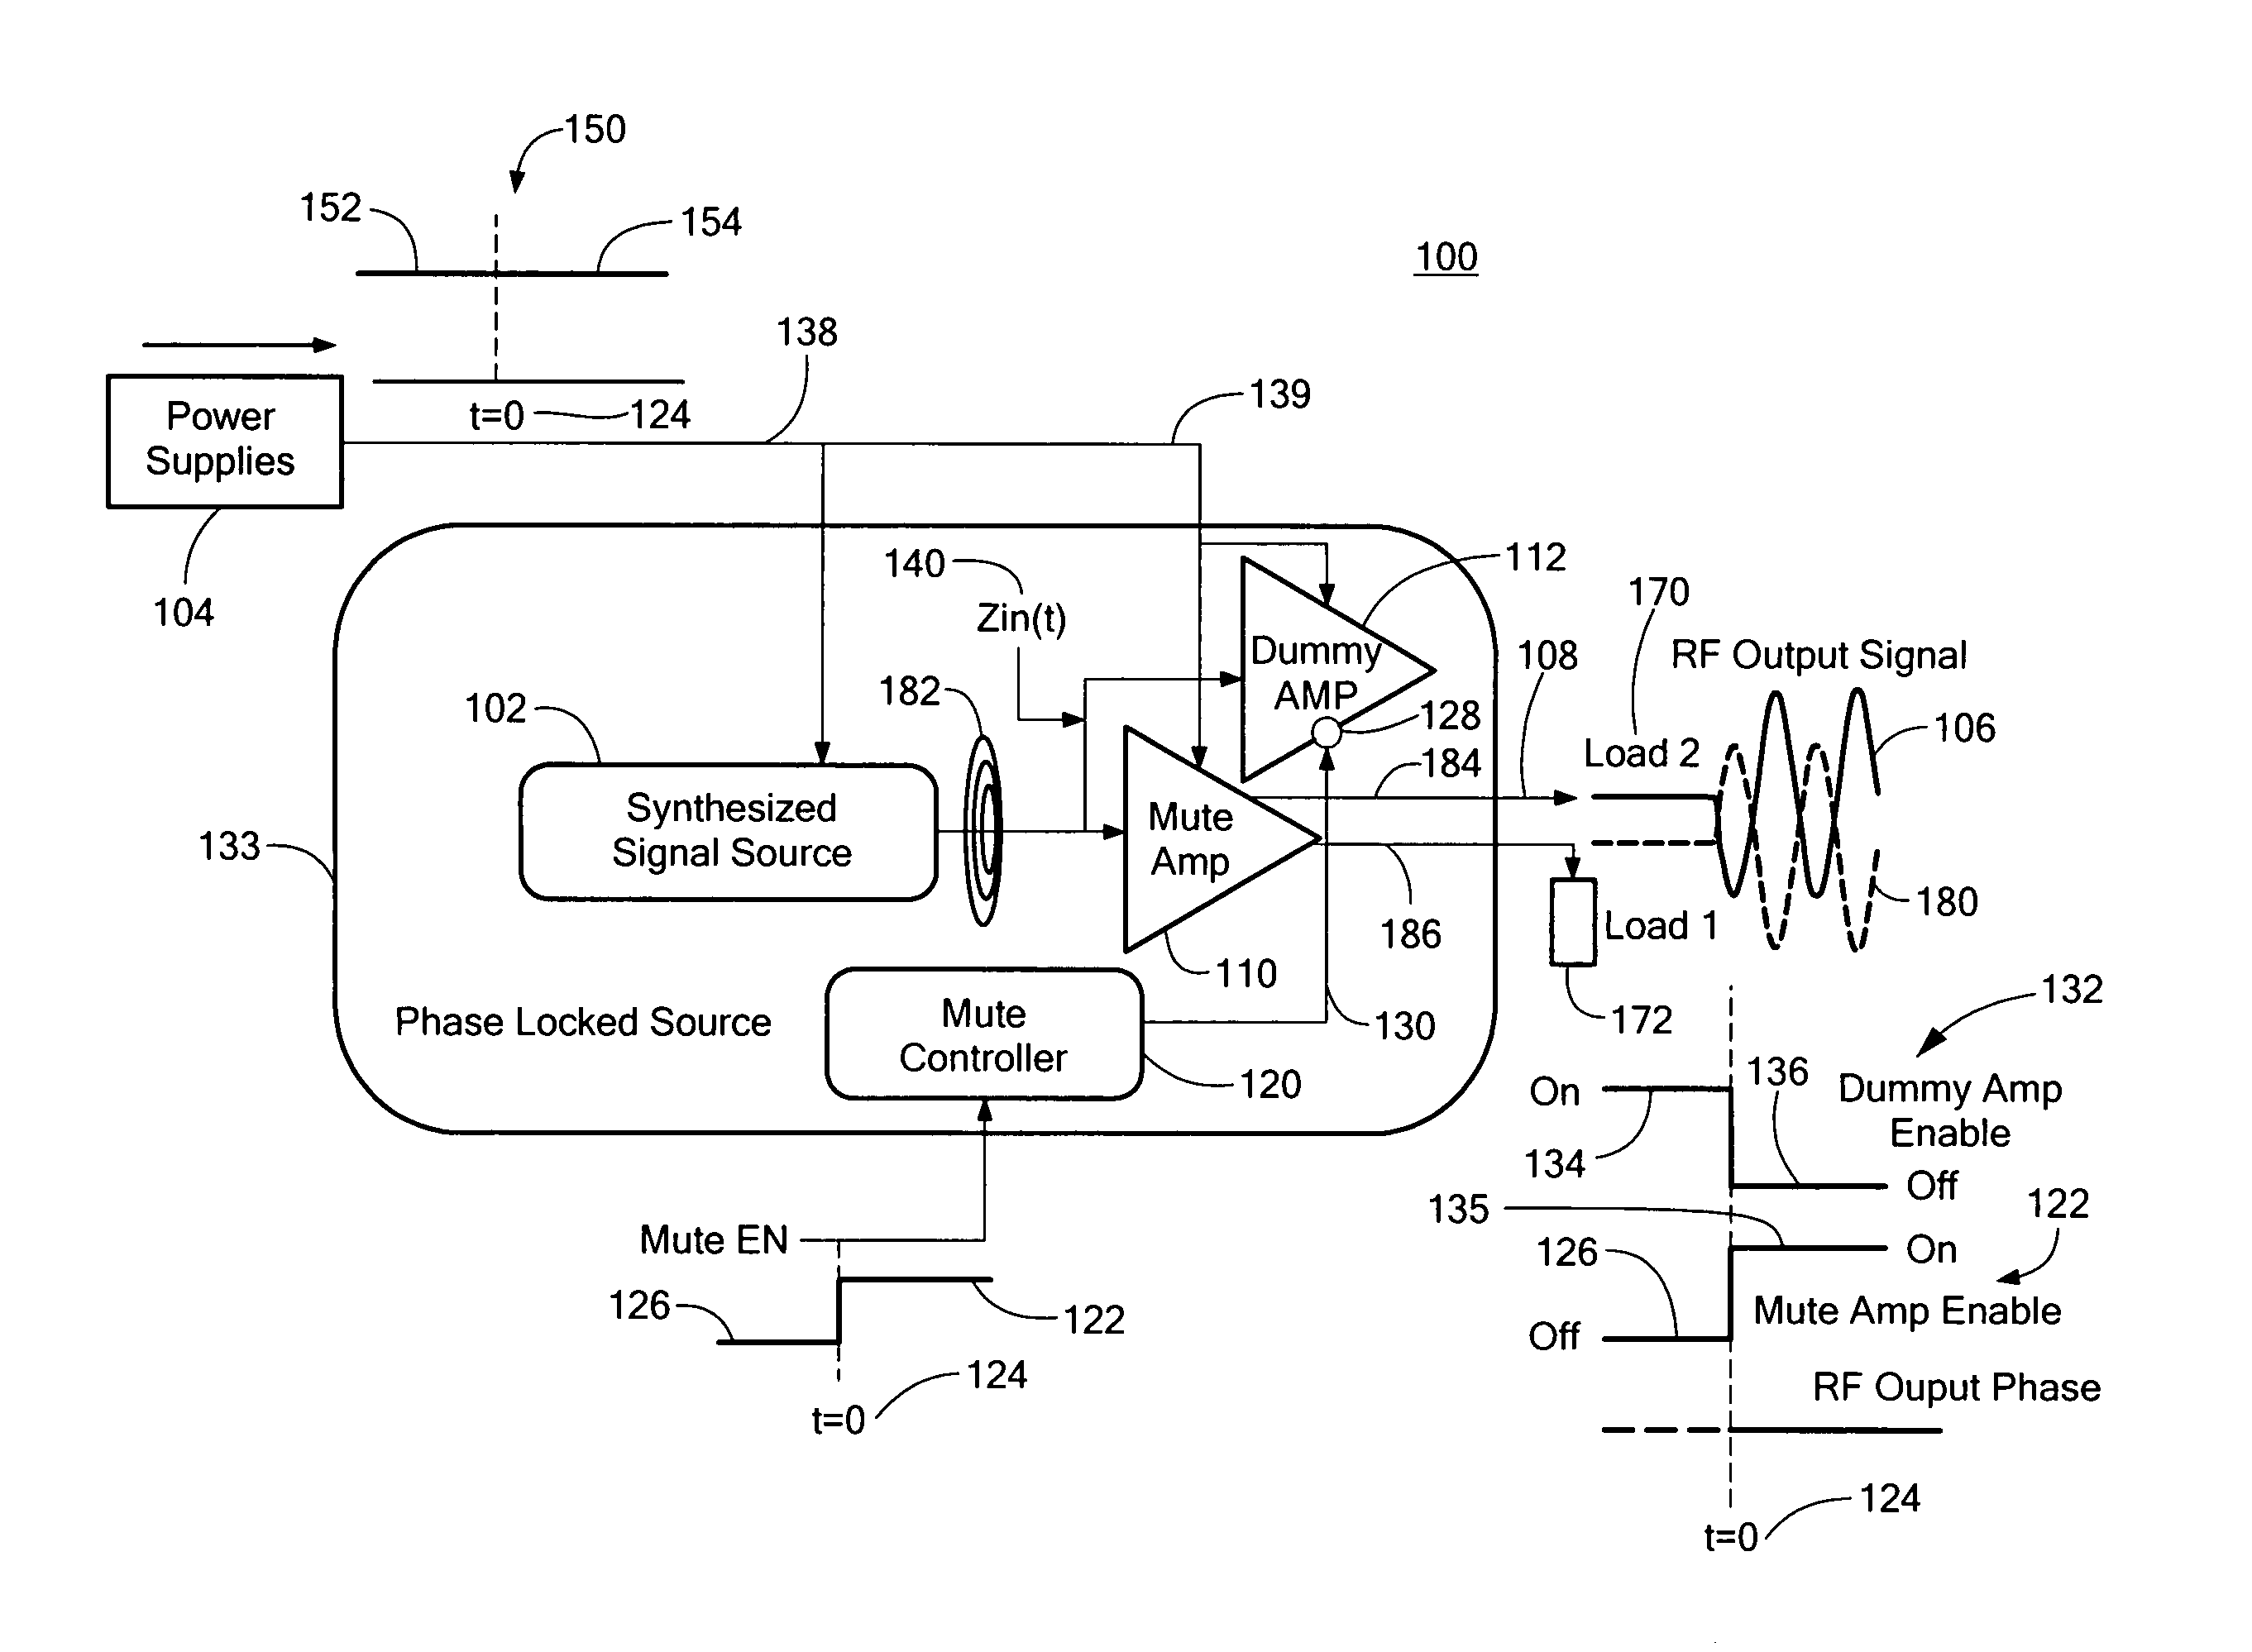 Fast turn on system for a synthesized source signal